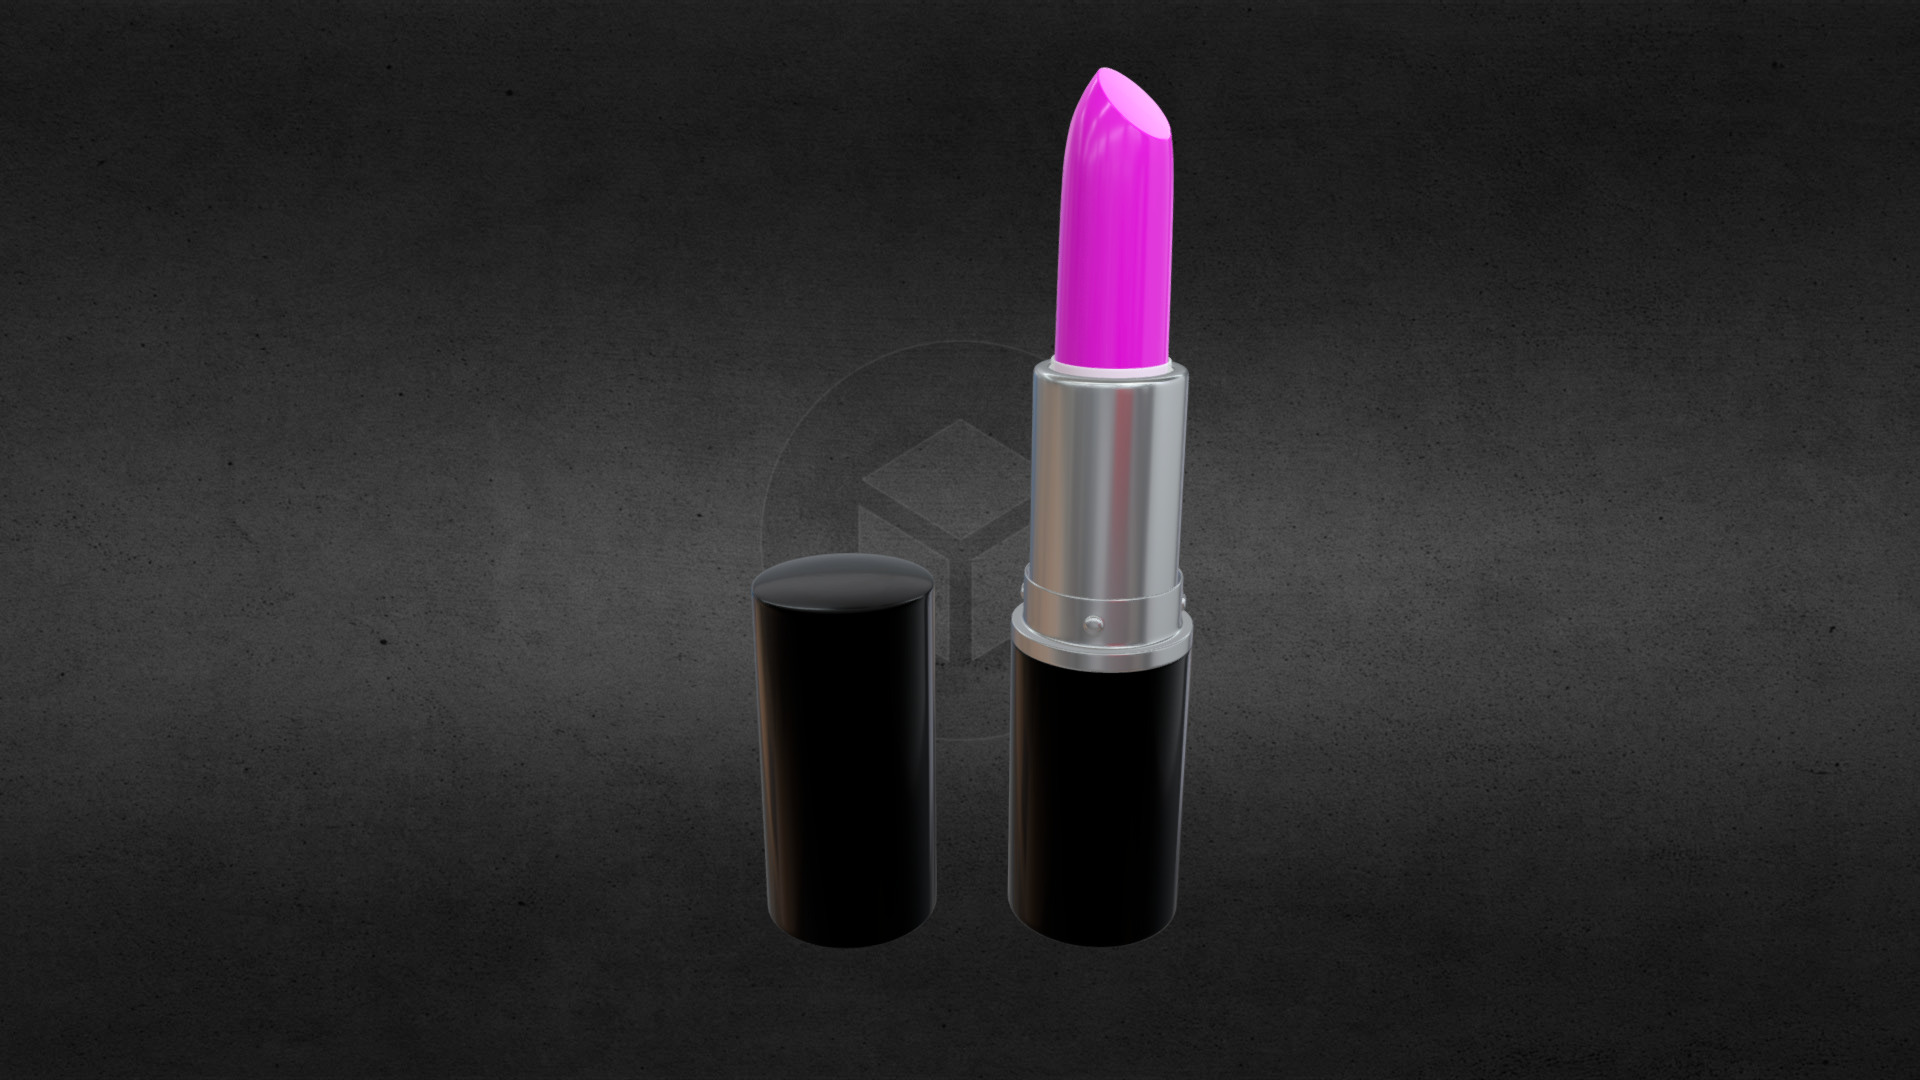 3D model Lipstick - This is a 3D model of the Lipstick. The 3D model is about a pink and white lipstick.